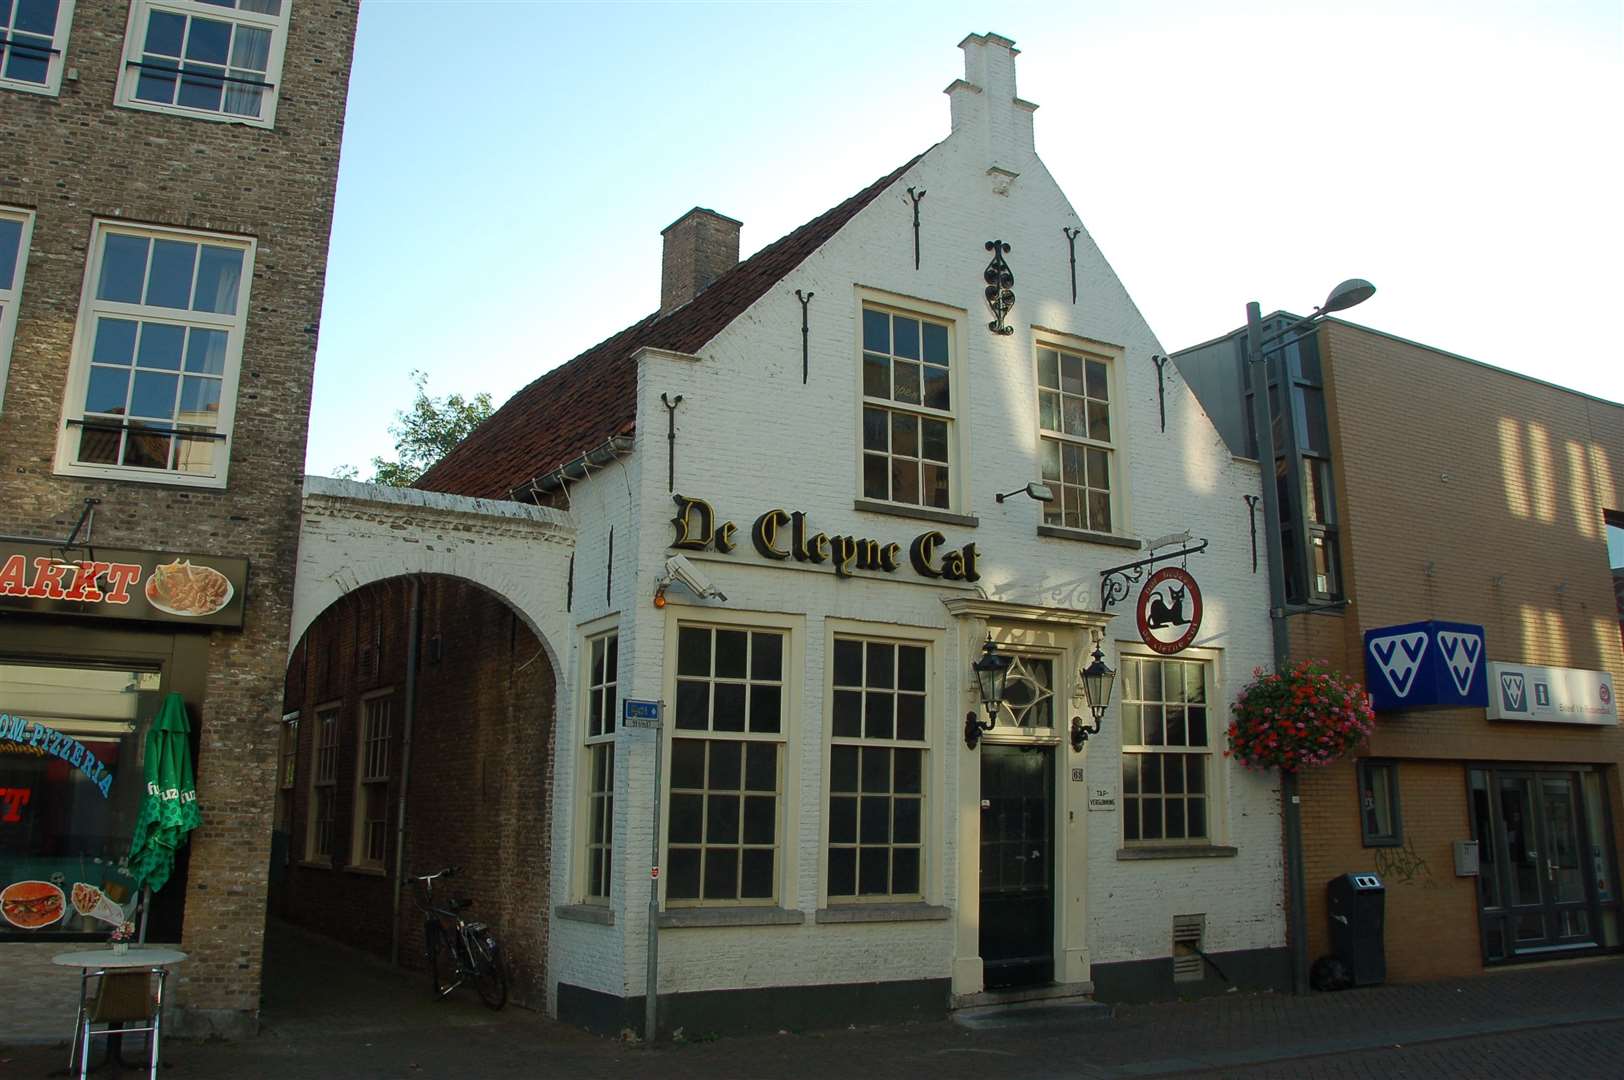 De Clyne Cat, the oldest building next to the VVV, the tourist office, in Roosendaal.